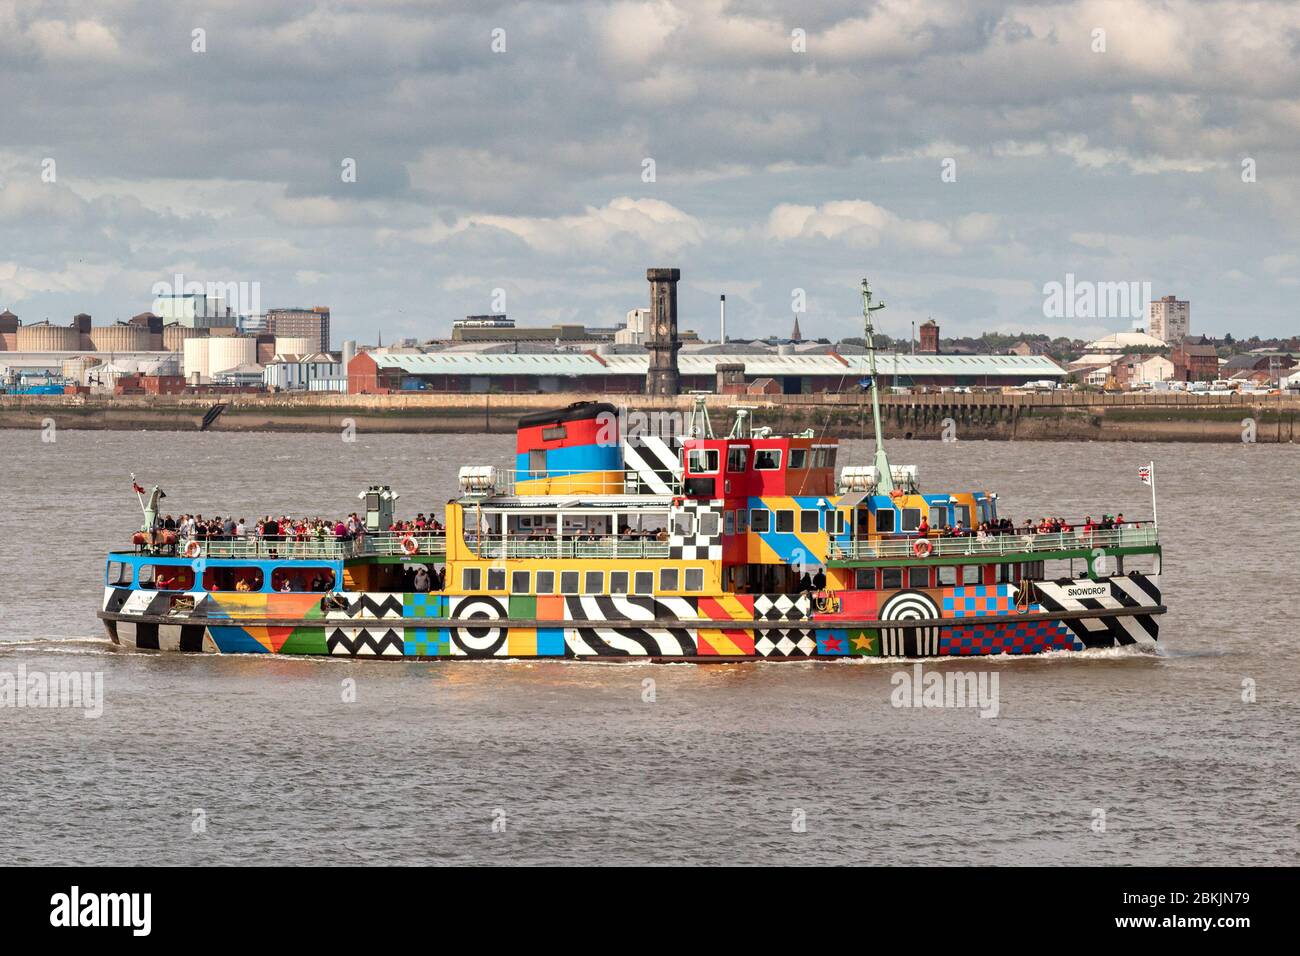 Mersey river ferry 'Snowdrop' in dazzle livery designed by Sir Peter Blake against Liverpool city skyline. Stock Photo